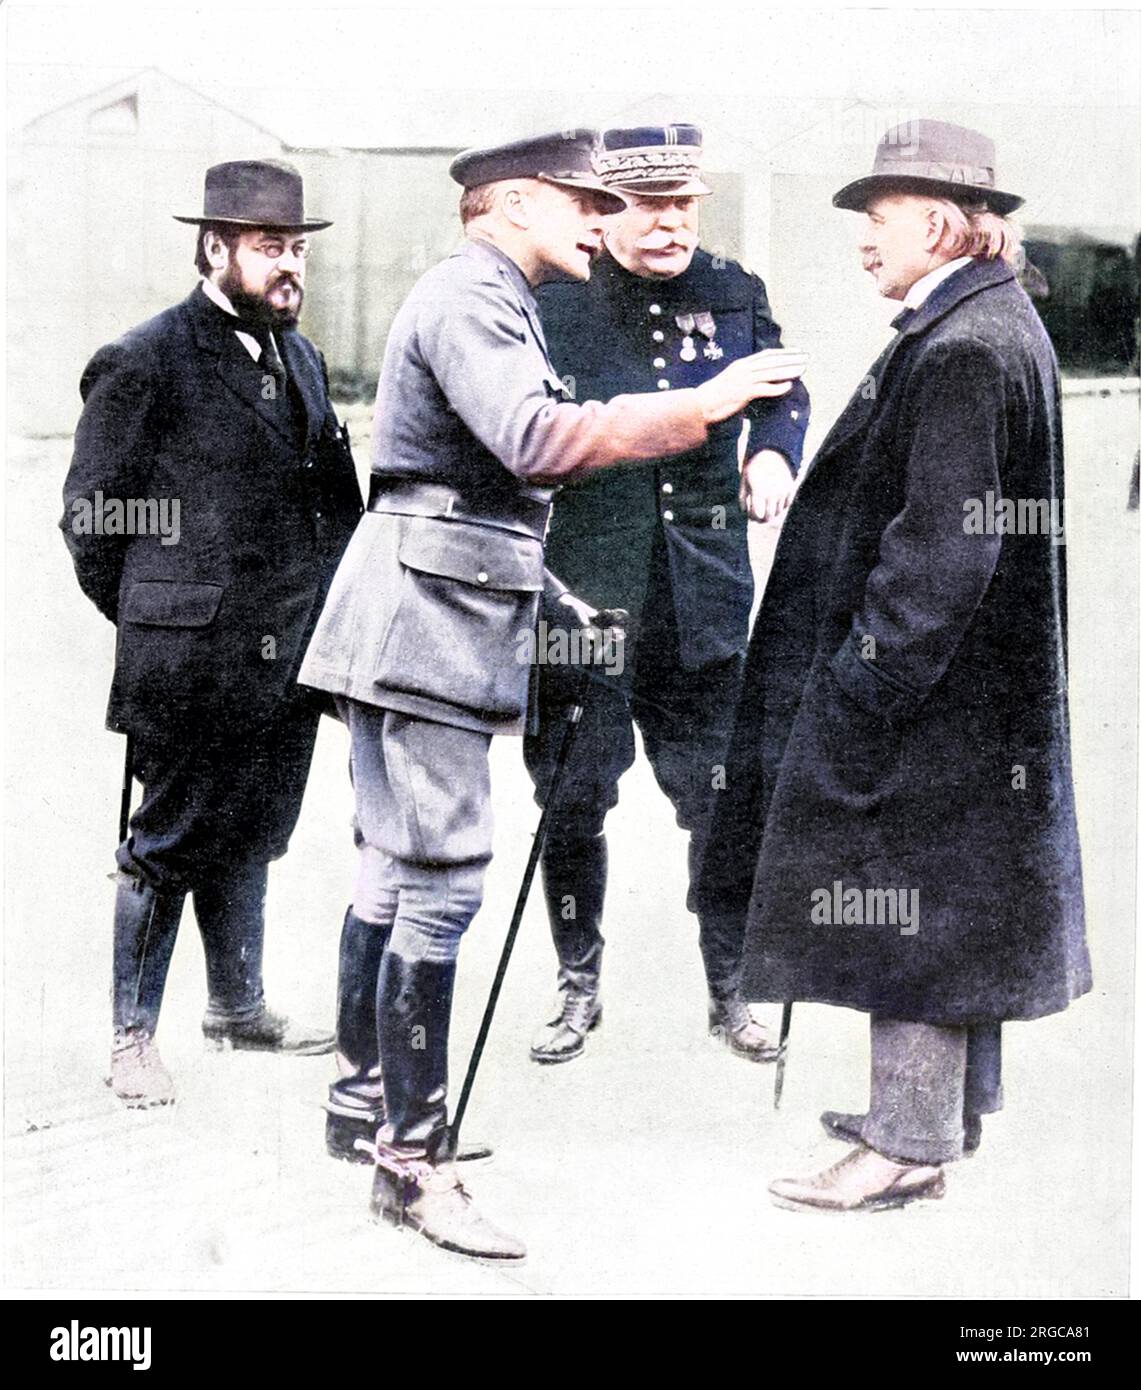 Meeting between political and military leaders of the Allies in France, 1916. The group includes Field Marshal Sir Douglas Haig (1861-1928), Commander-in-Chief of the British army and General Joseph Joffre (1852-1931), Commander of the French army. Also pictured are the British Secretary for War and later Prime Minister David Lloyd George (1863-1945) with the French Minister of Munitions, Albert Thomas. Stock Photo